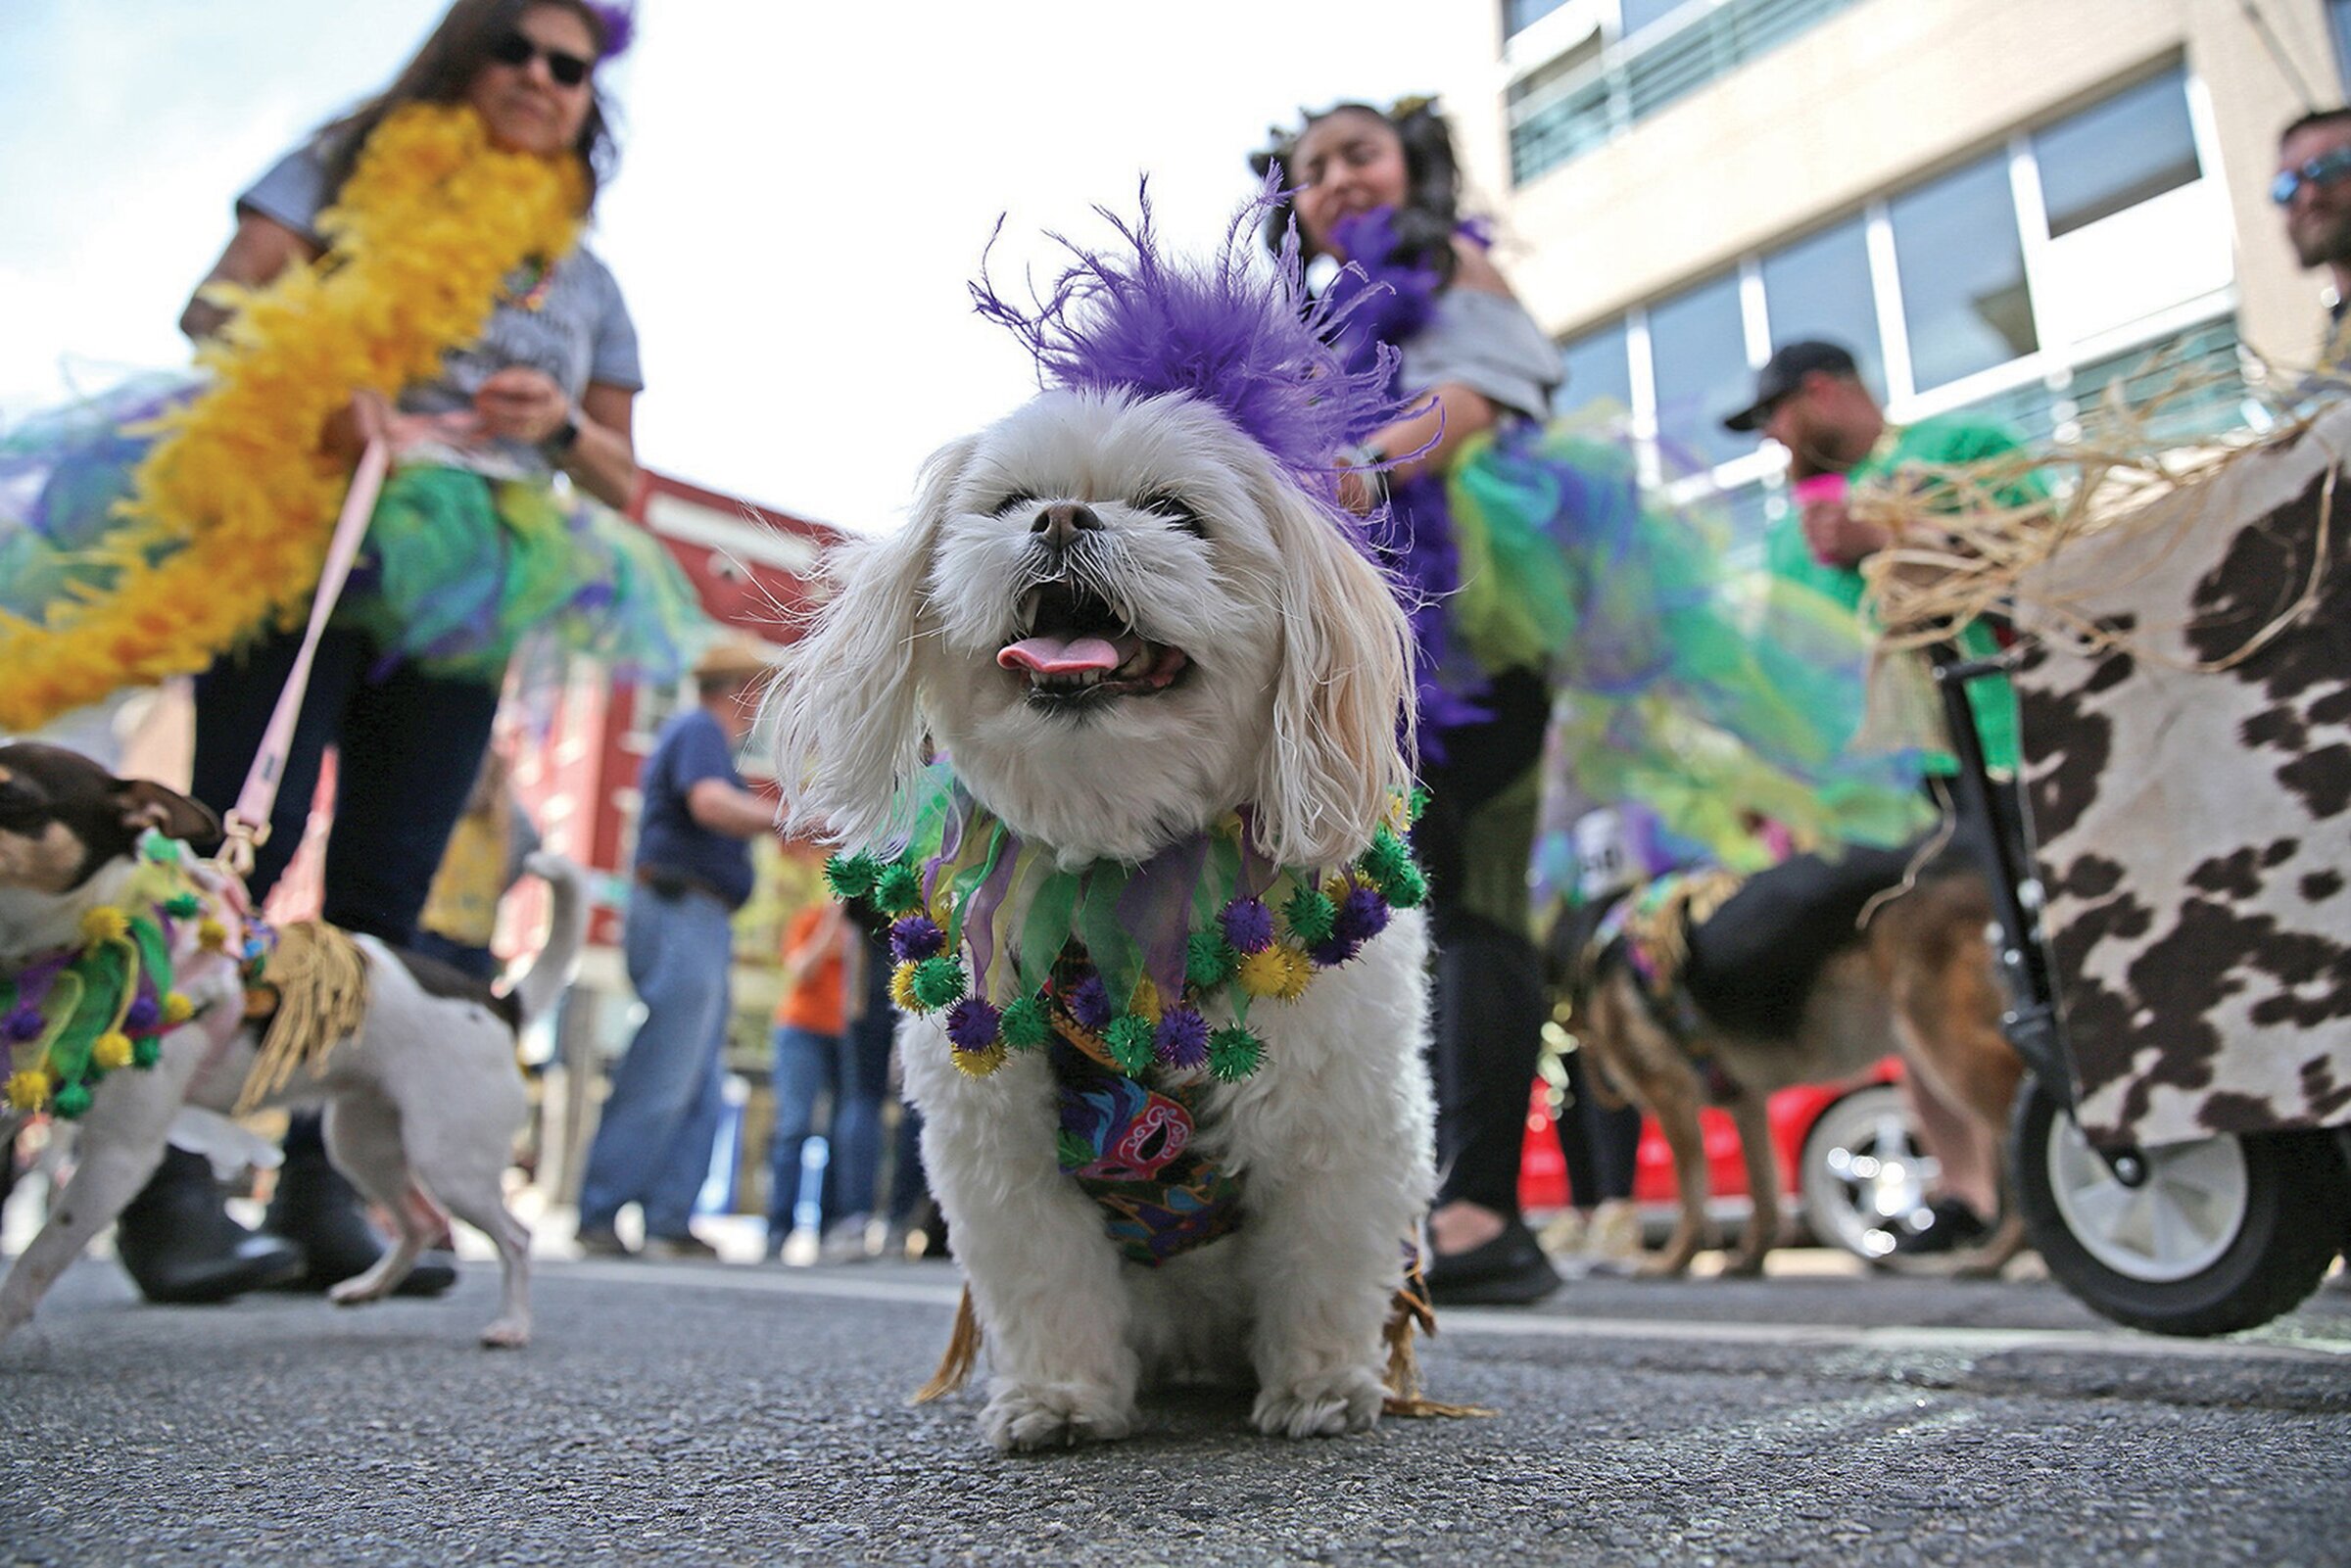 Barkus on Main coming back to delight of dogs and humans The Arkansas